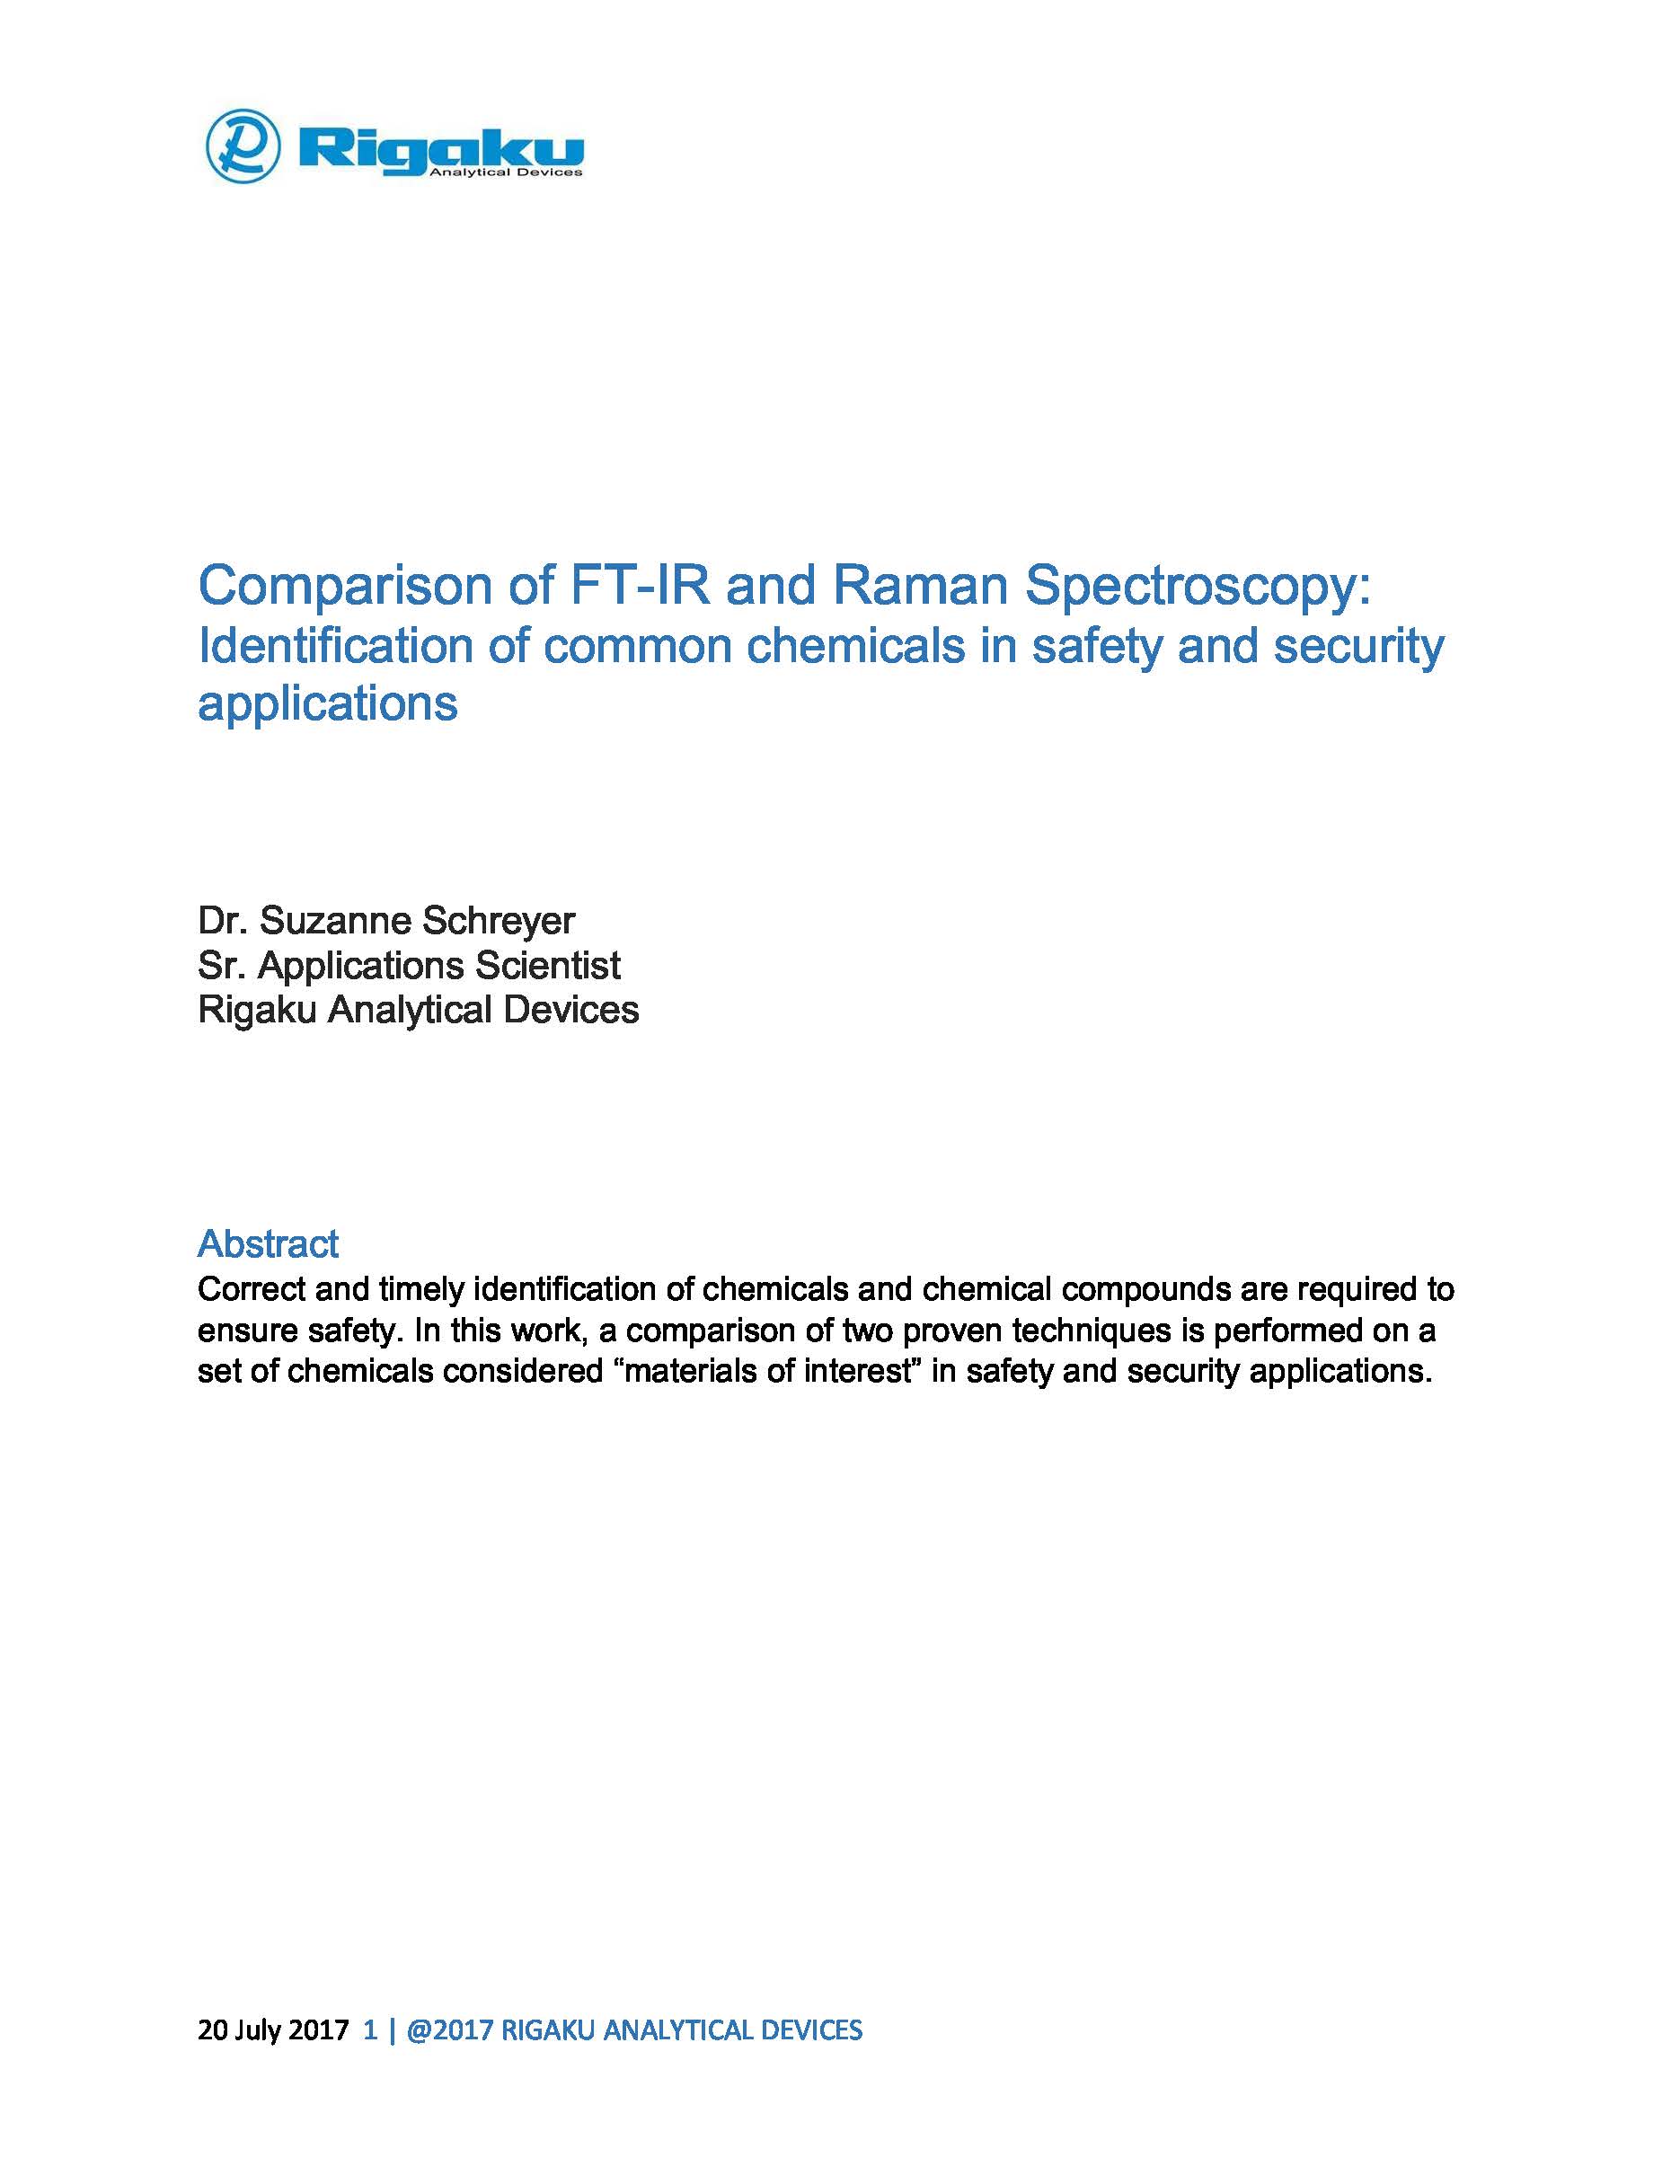 Comparison of IR and Raman Spectroscopy(20July2017)_Page_01